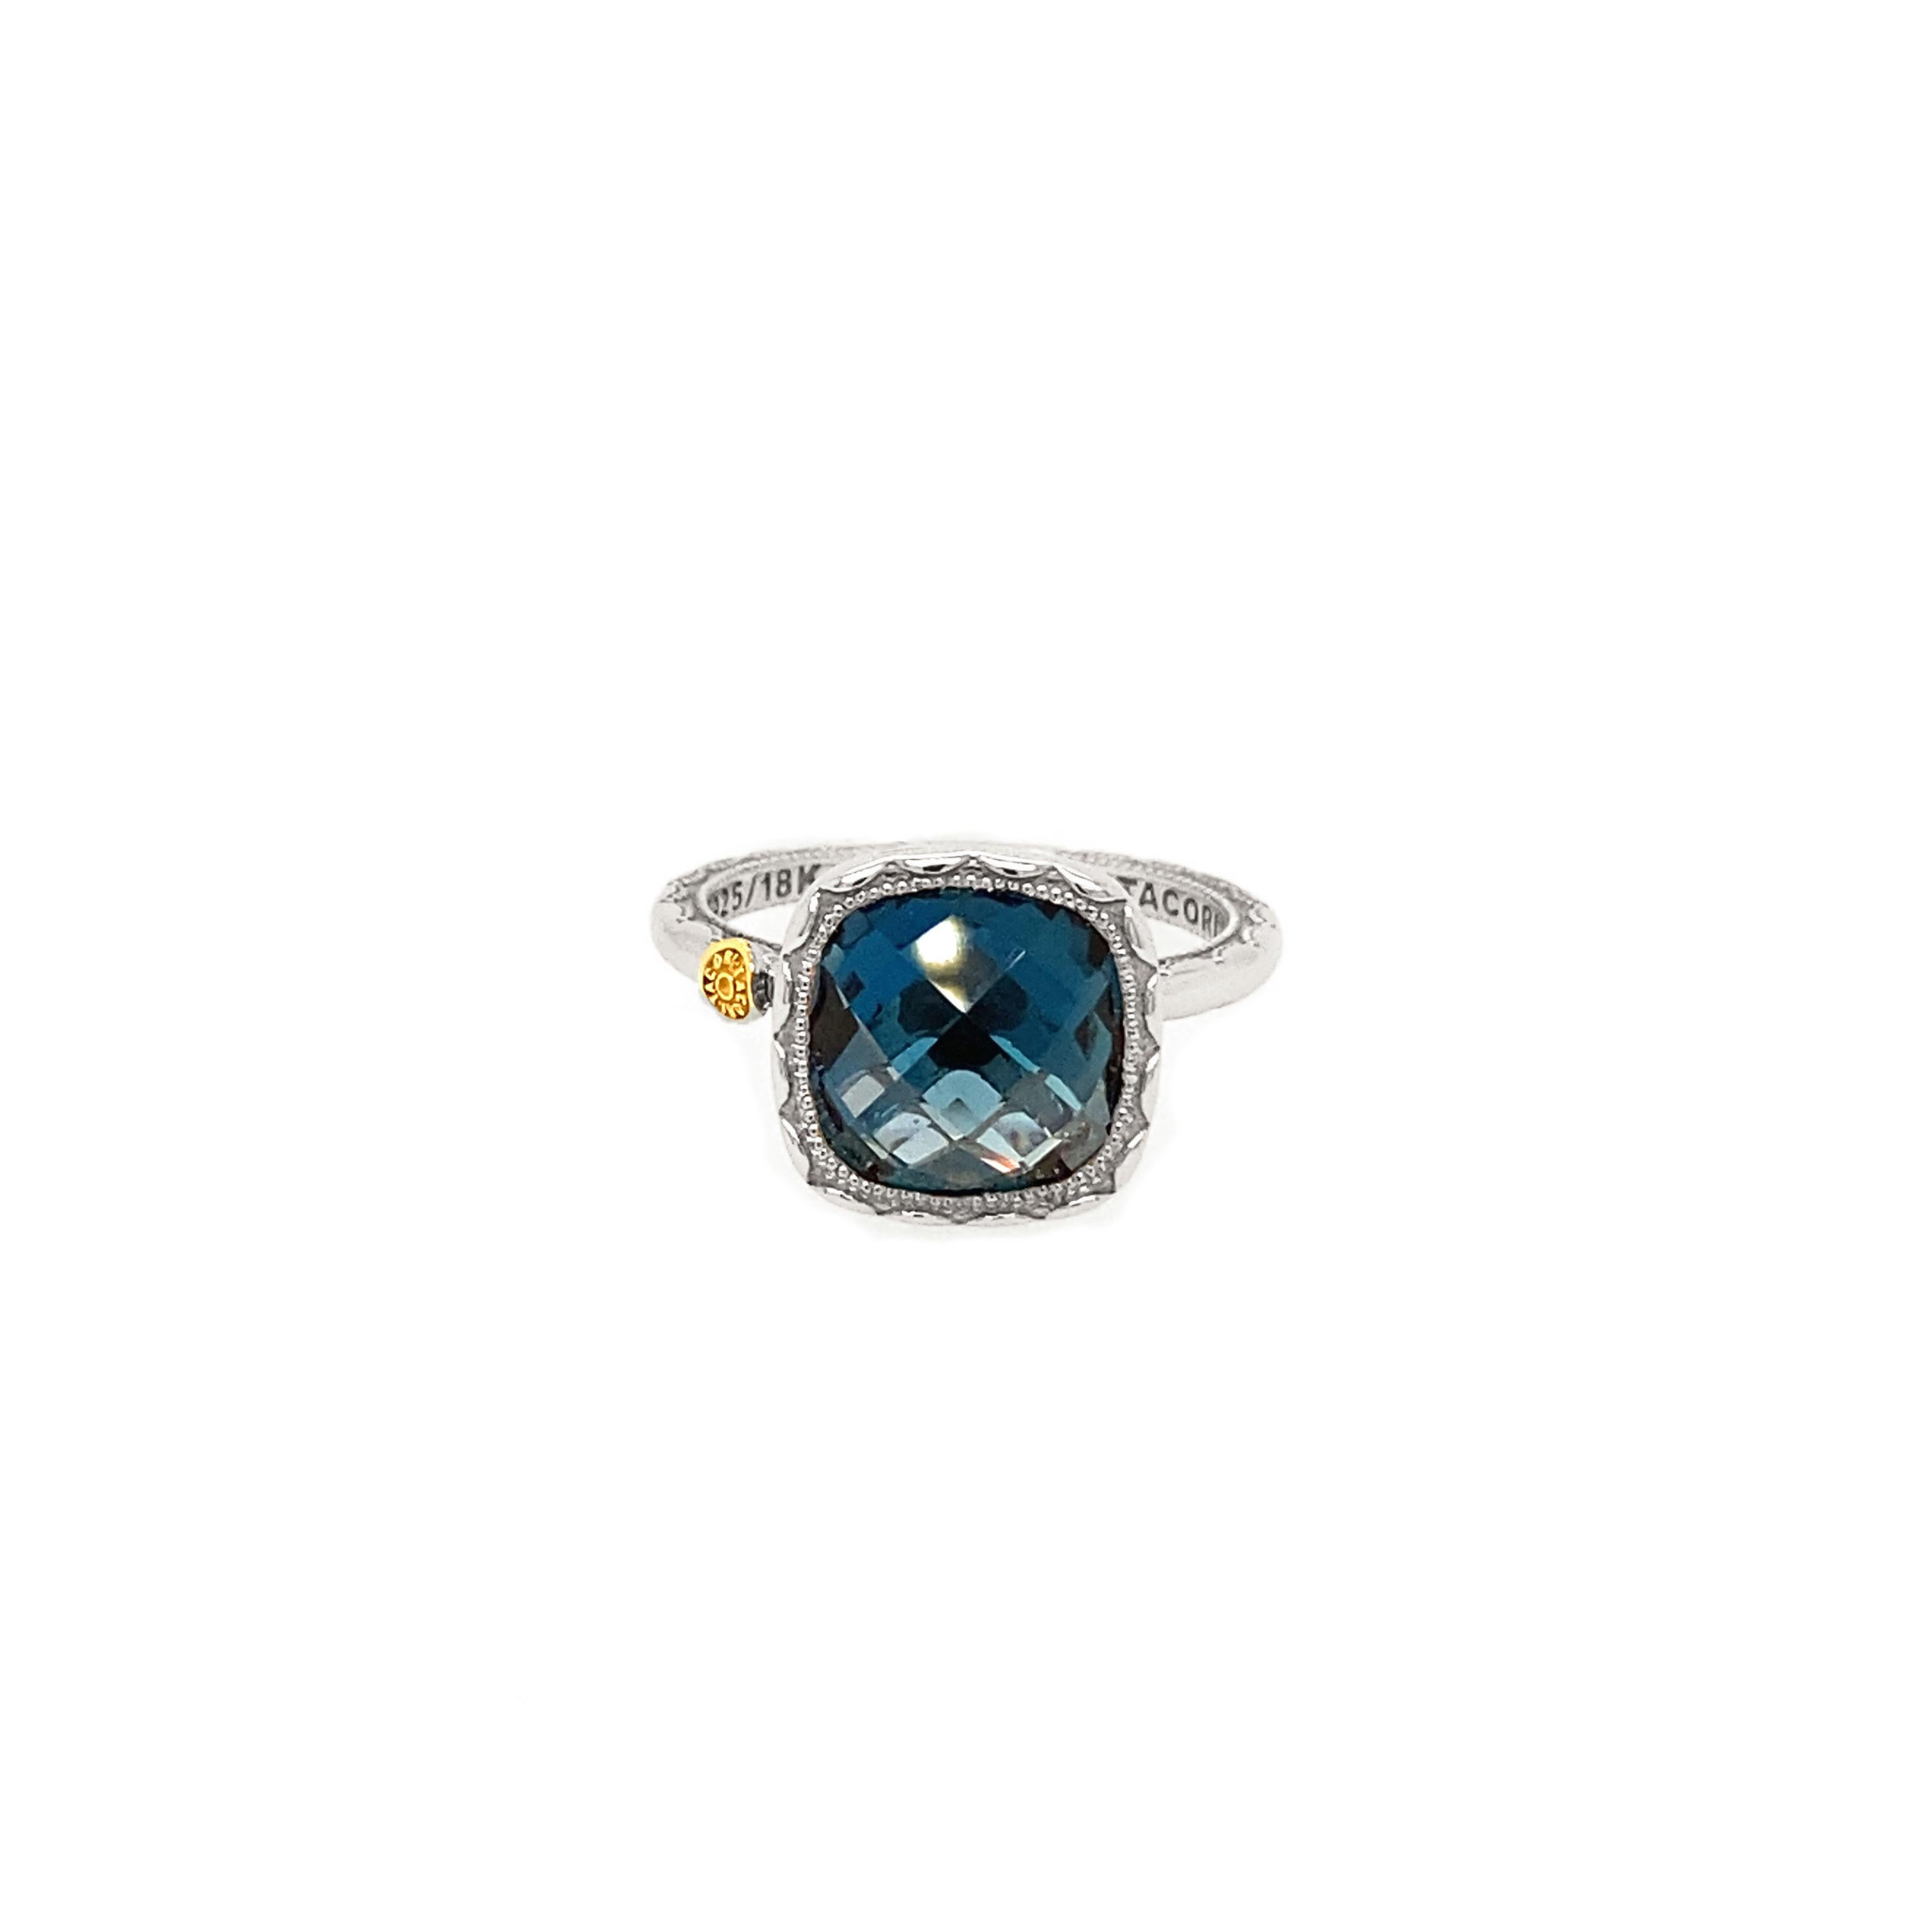 Sterling silver Crescent Embrace Cushion Gem ring with 10mm London Blue Topaz. 18 karat yellow gold Tacori seal accent.